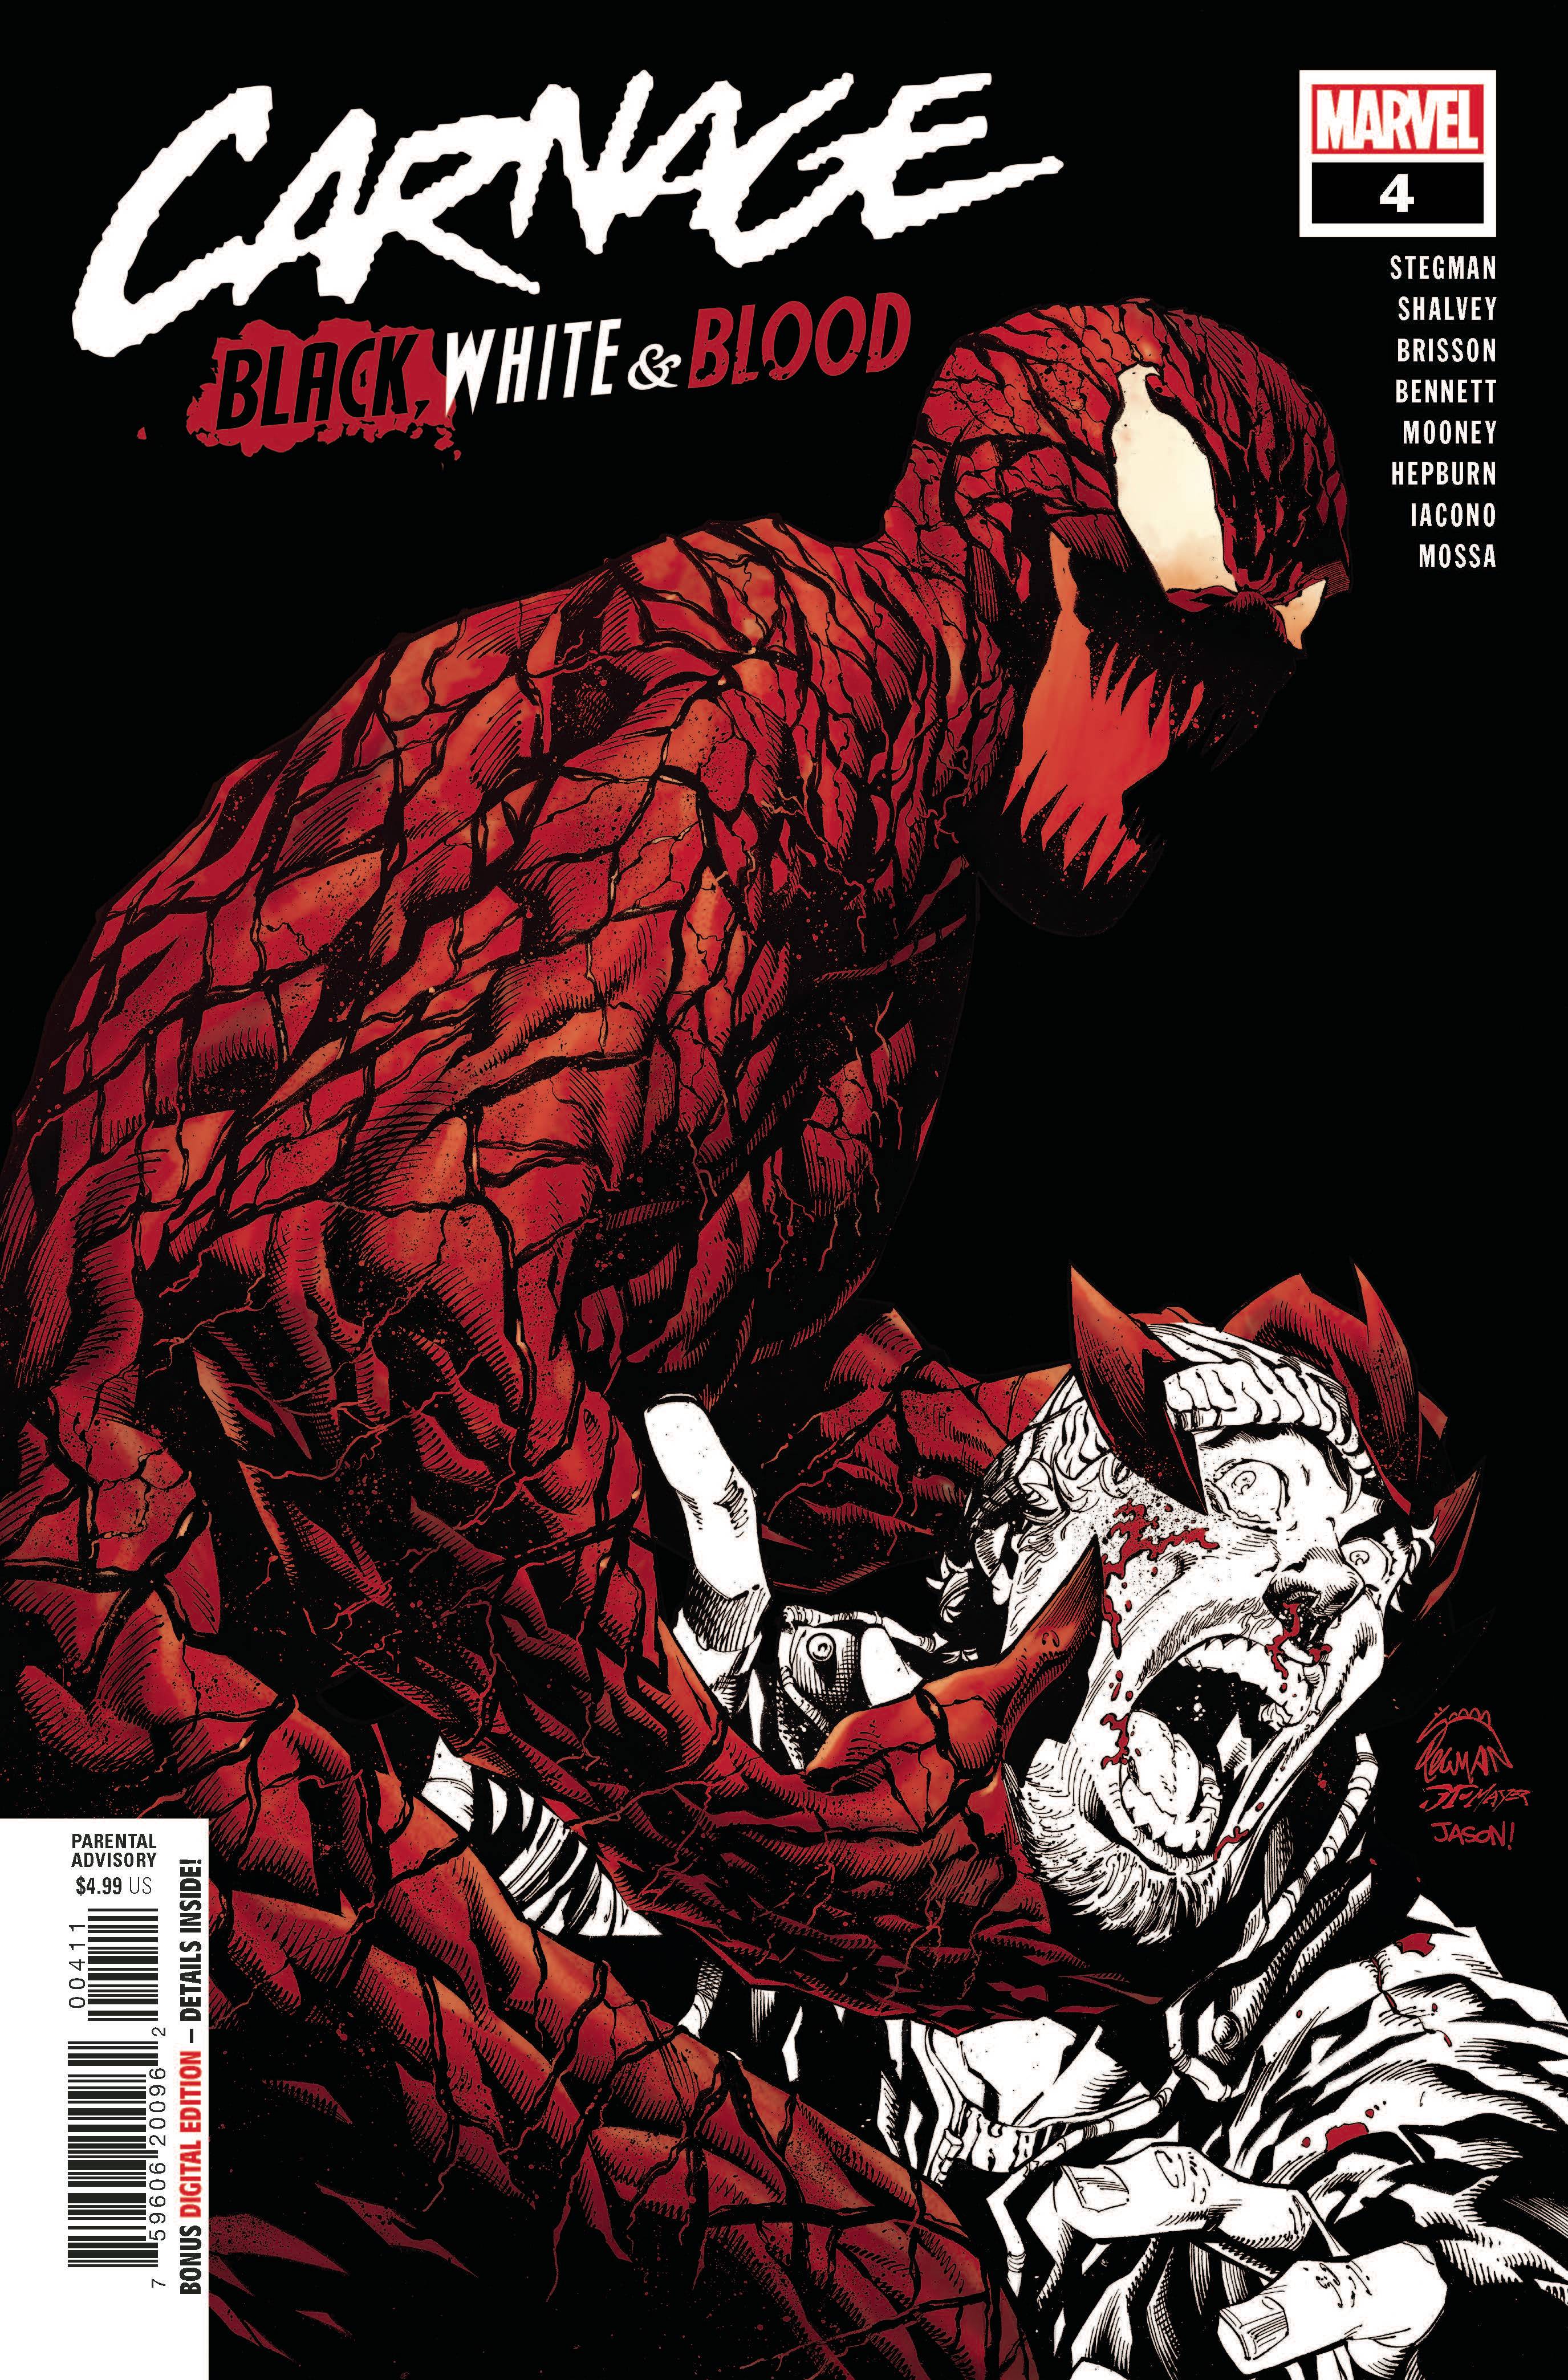 CARNAGE BLACK WHITE AND BLOOD #4 (OF 4) | L.A. Mood Comics and Games